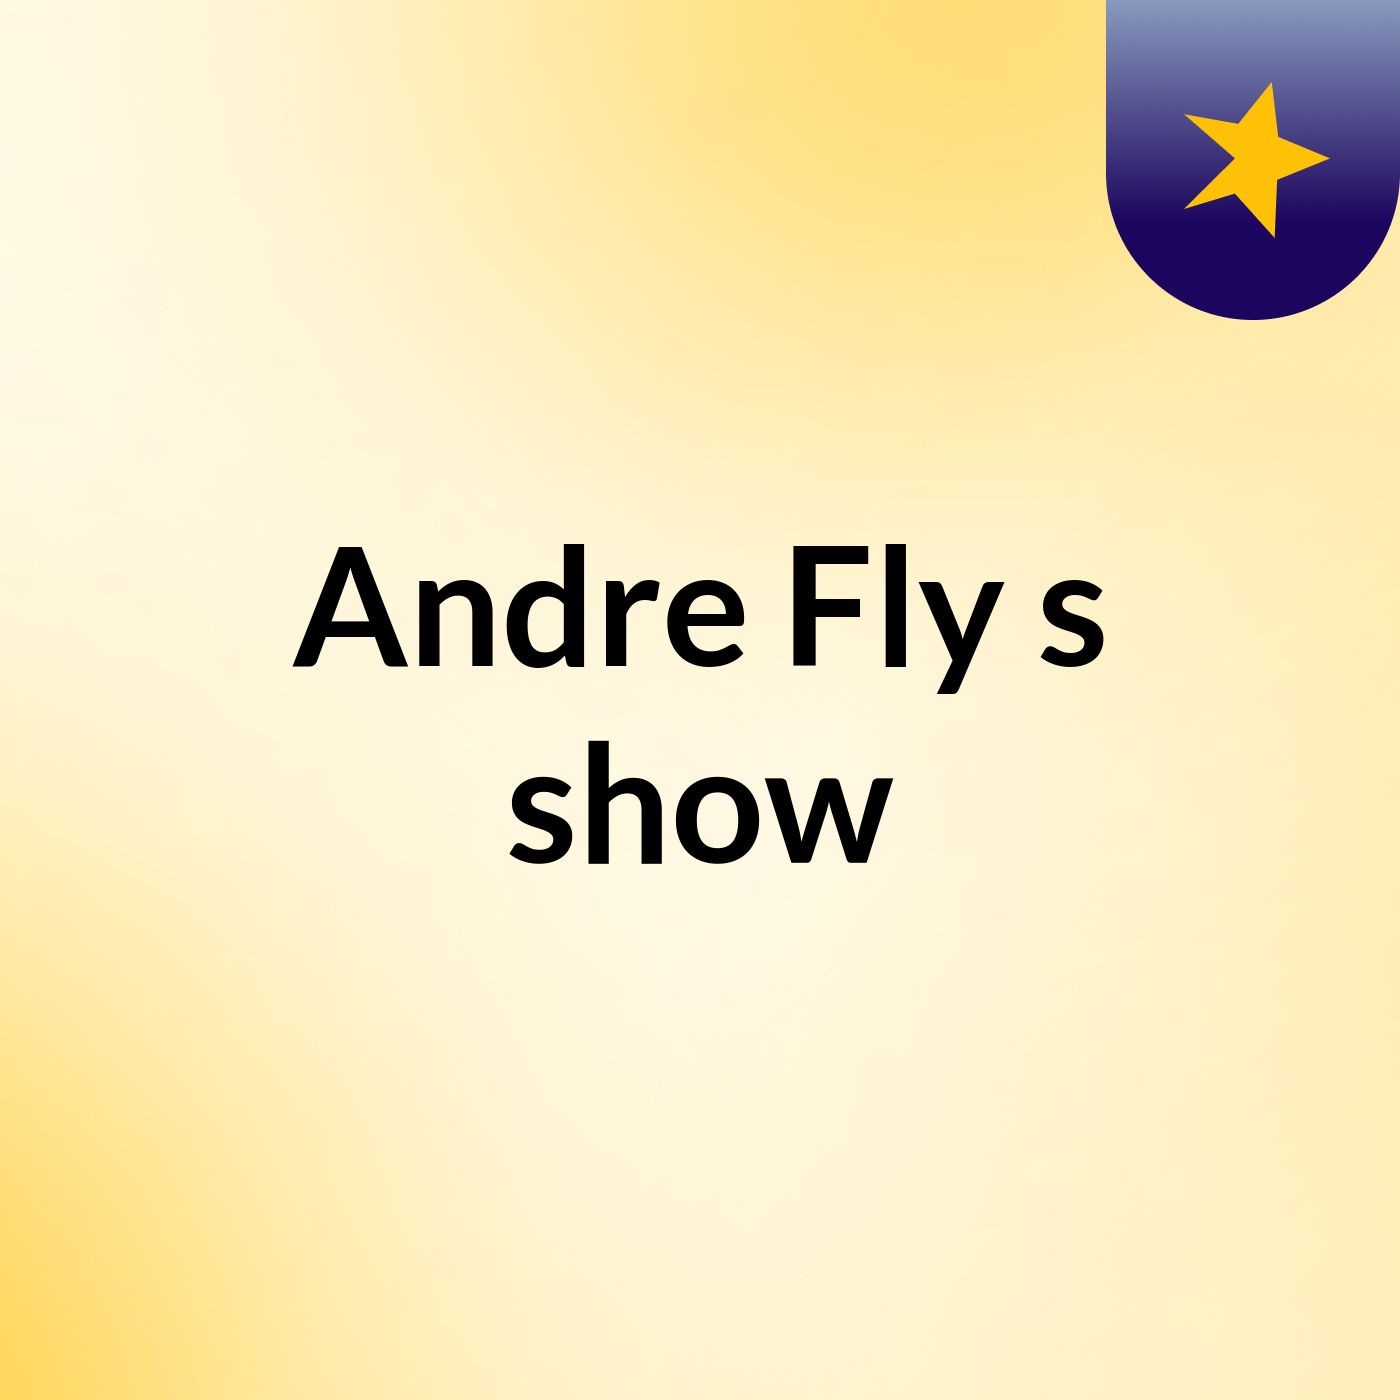 Andre Fly's show